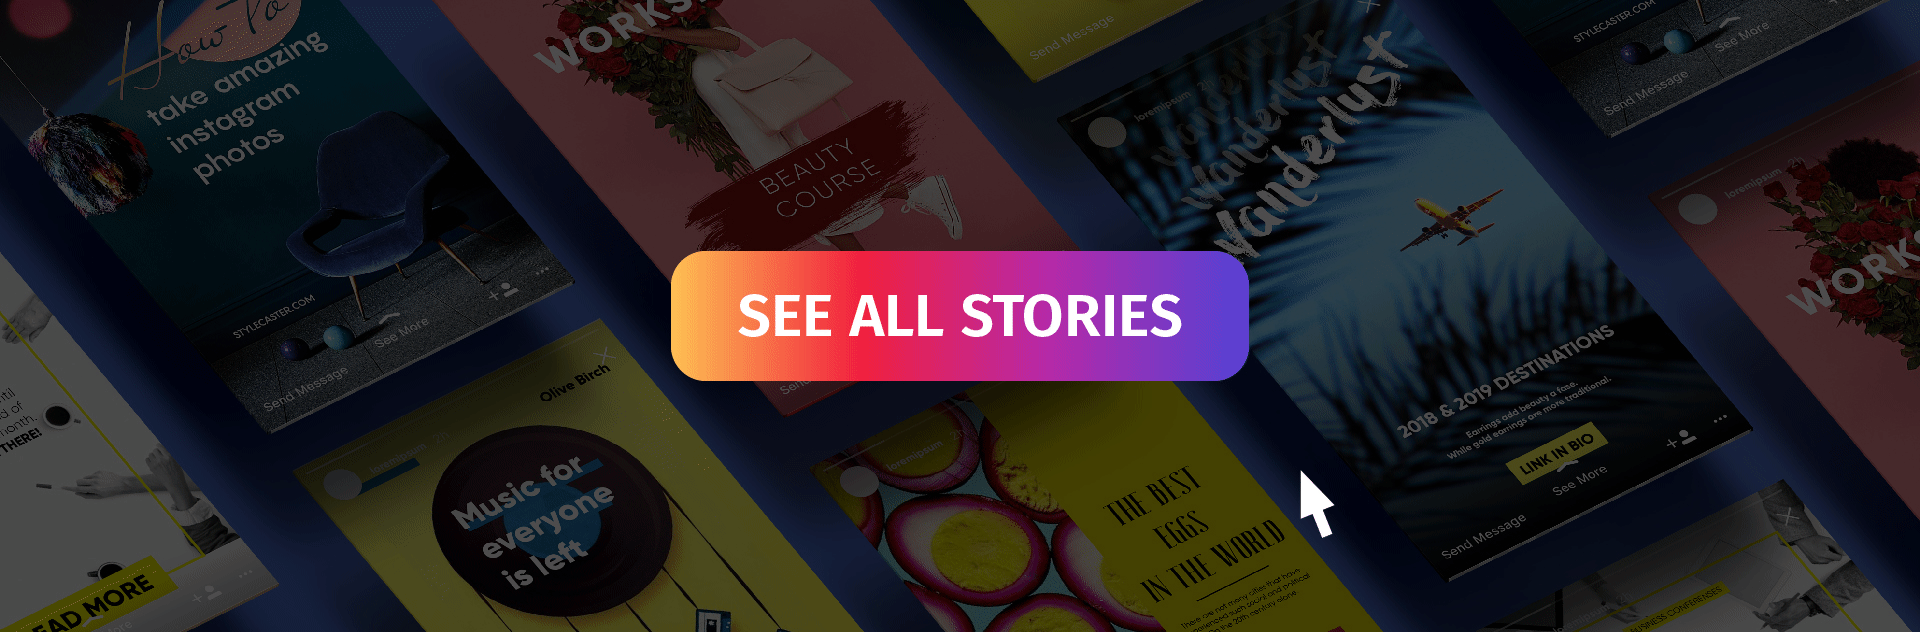 see all stories